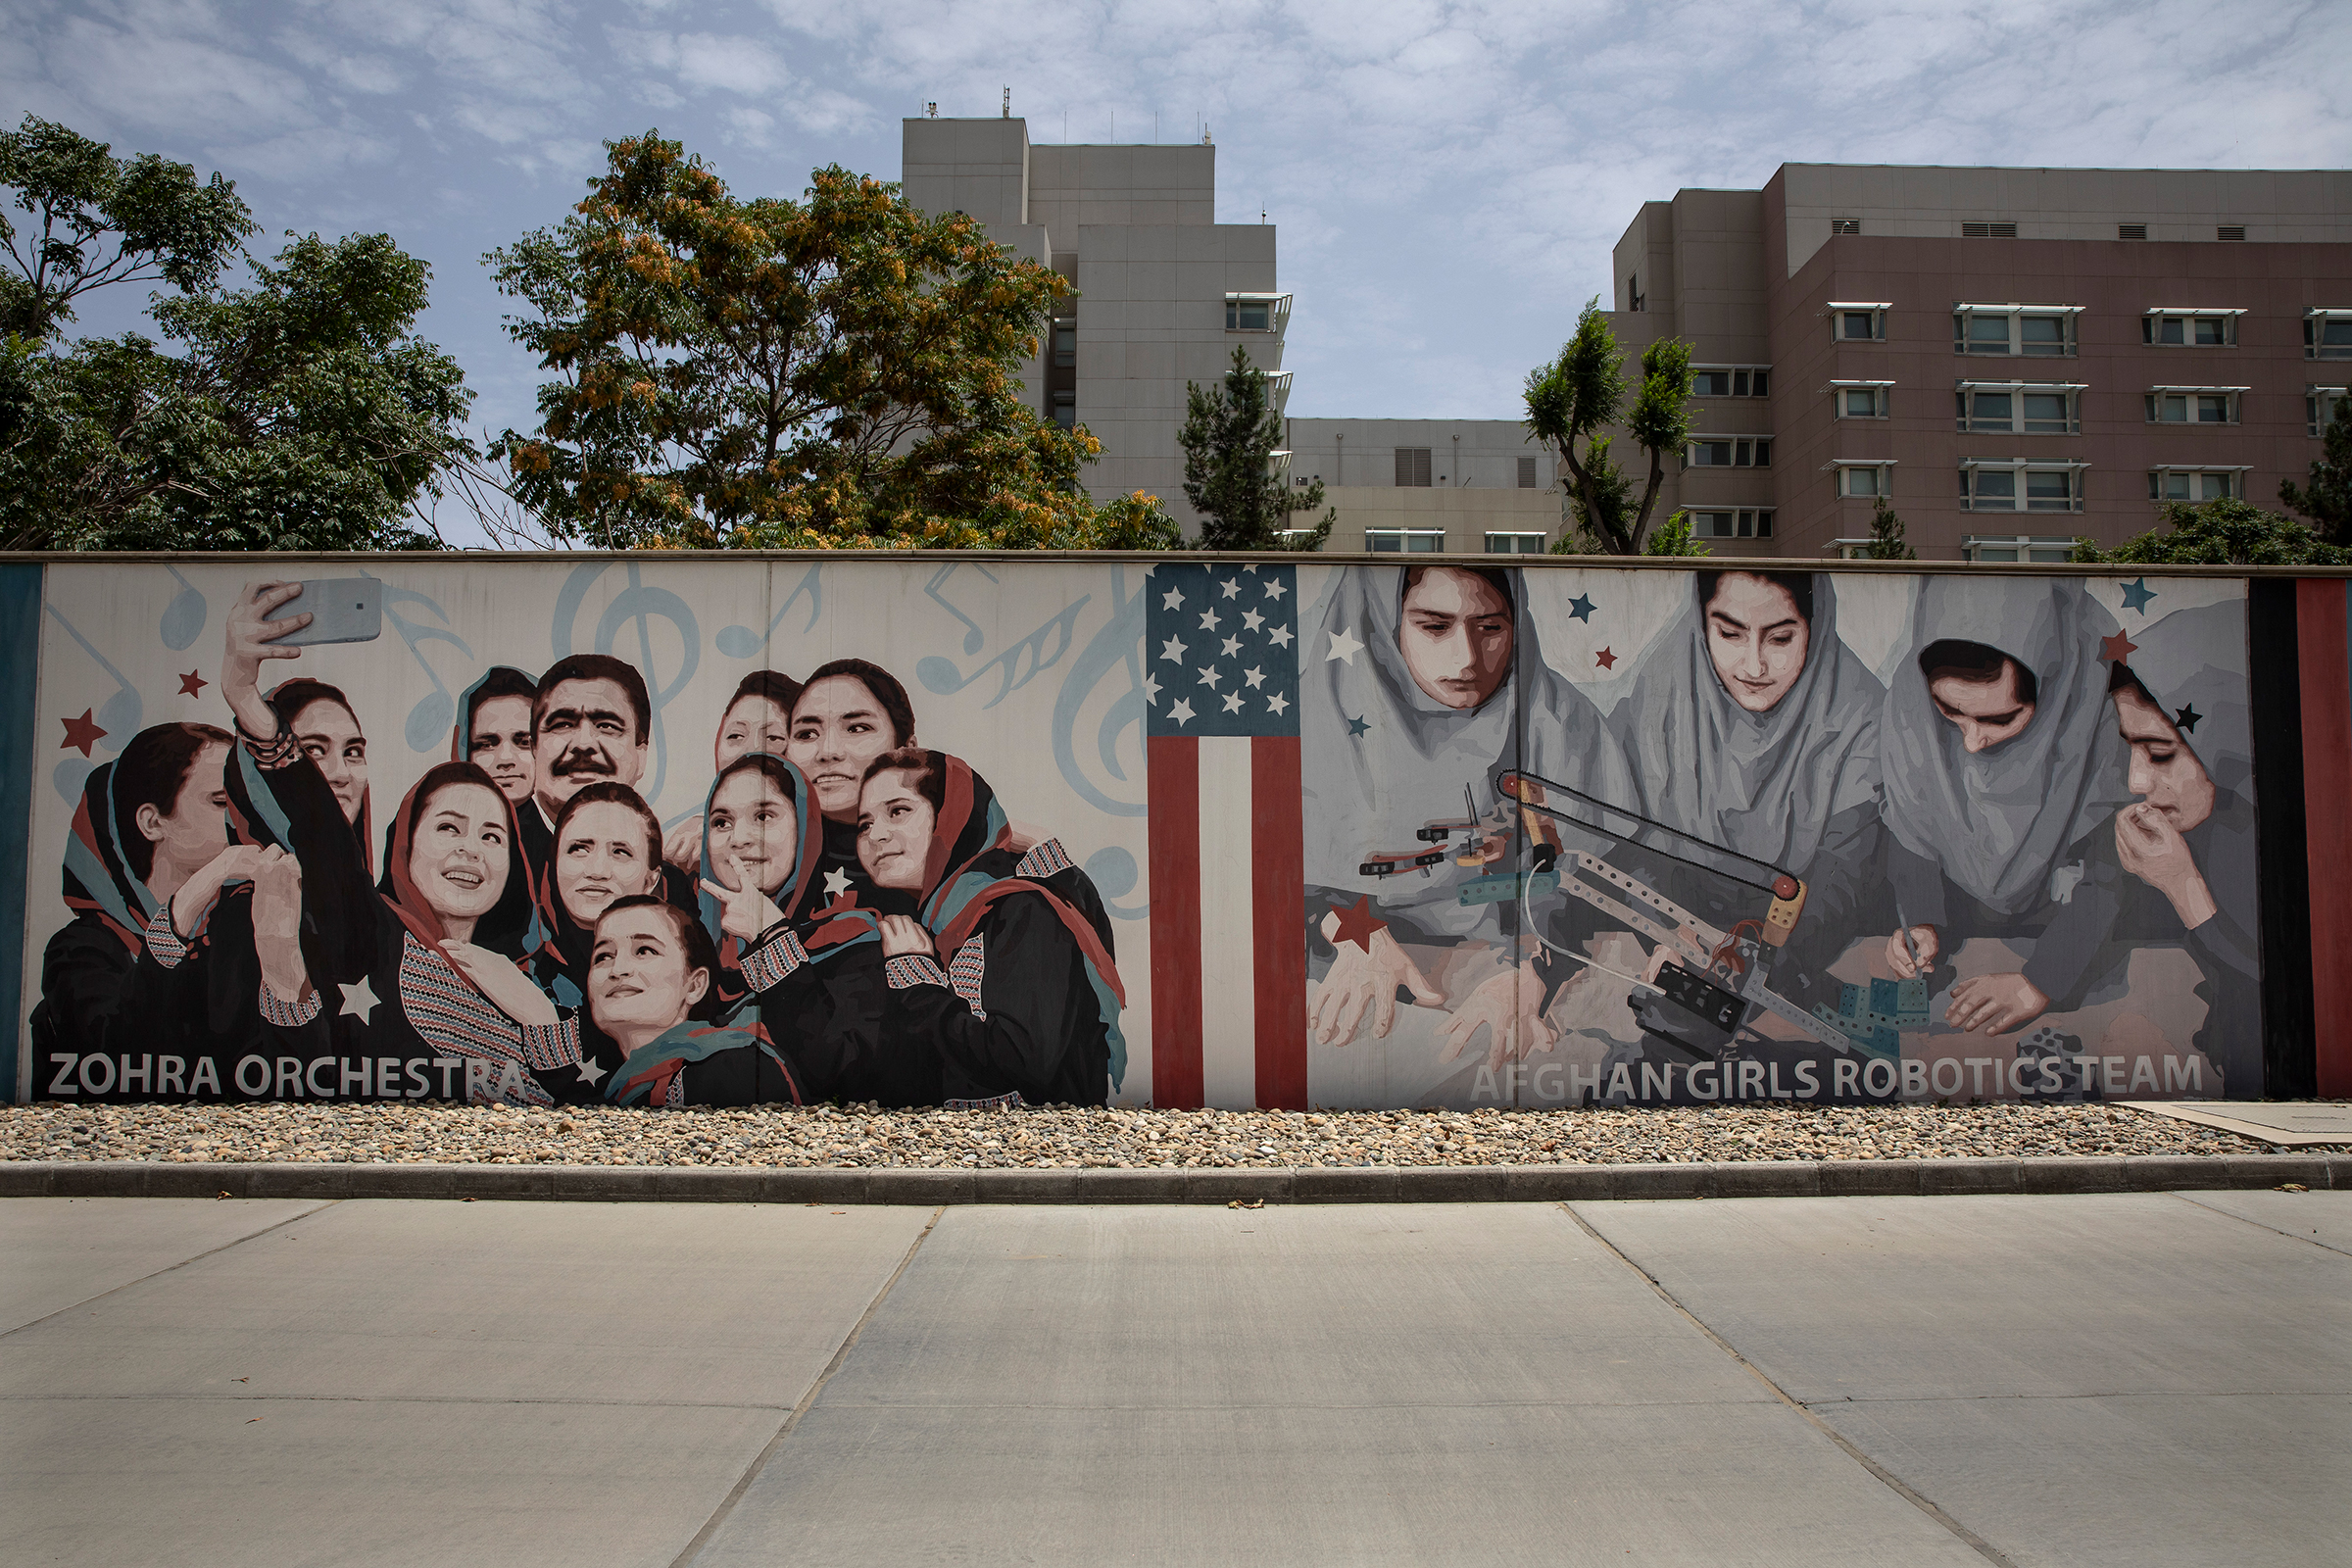 Murals are seen along the walls at the U.S. embassy in Kabul on July 30. In August, as the Taliban approached, staffers at the embassy scrambled to leave. (Paula Bronstein—Getty Images)